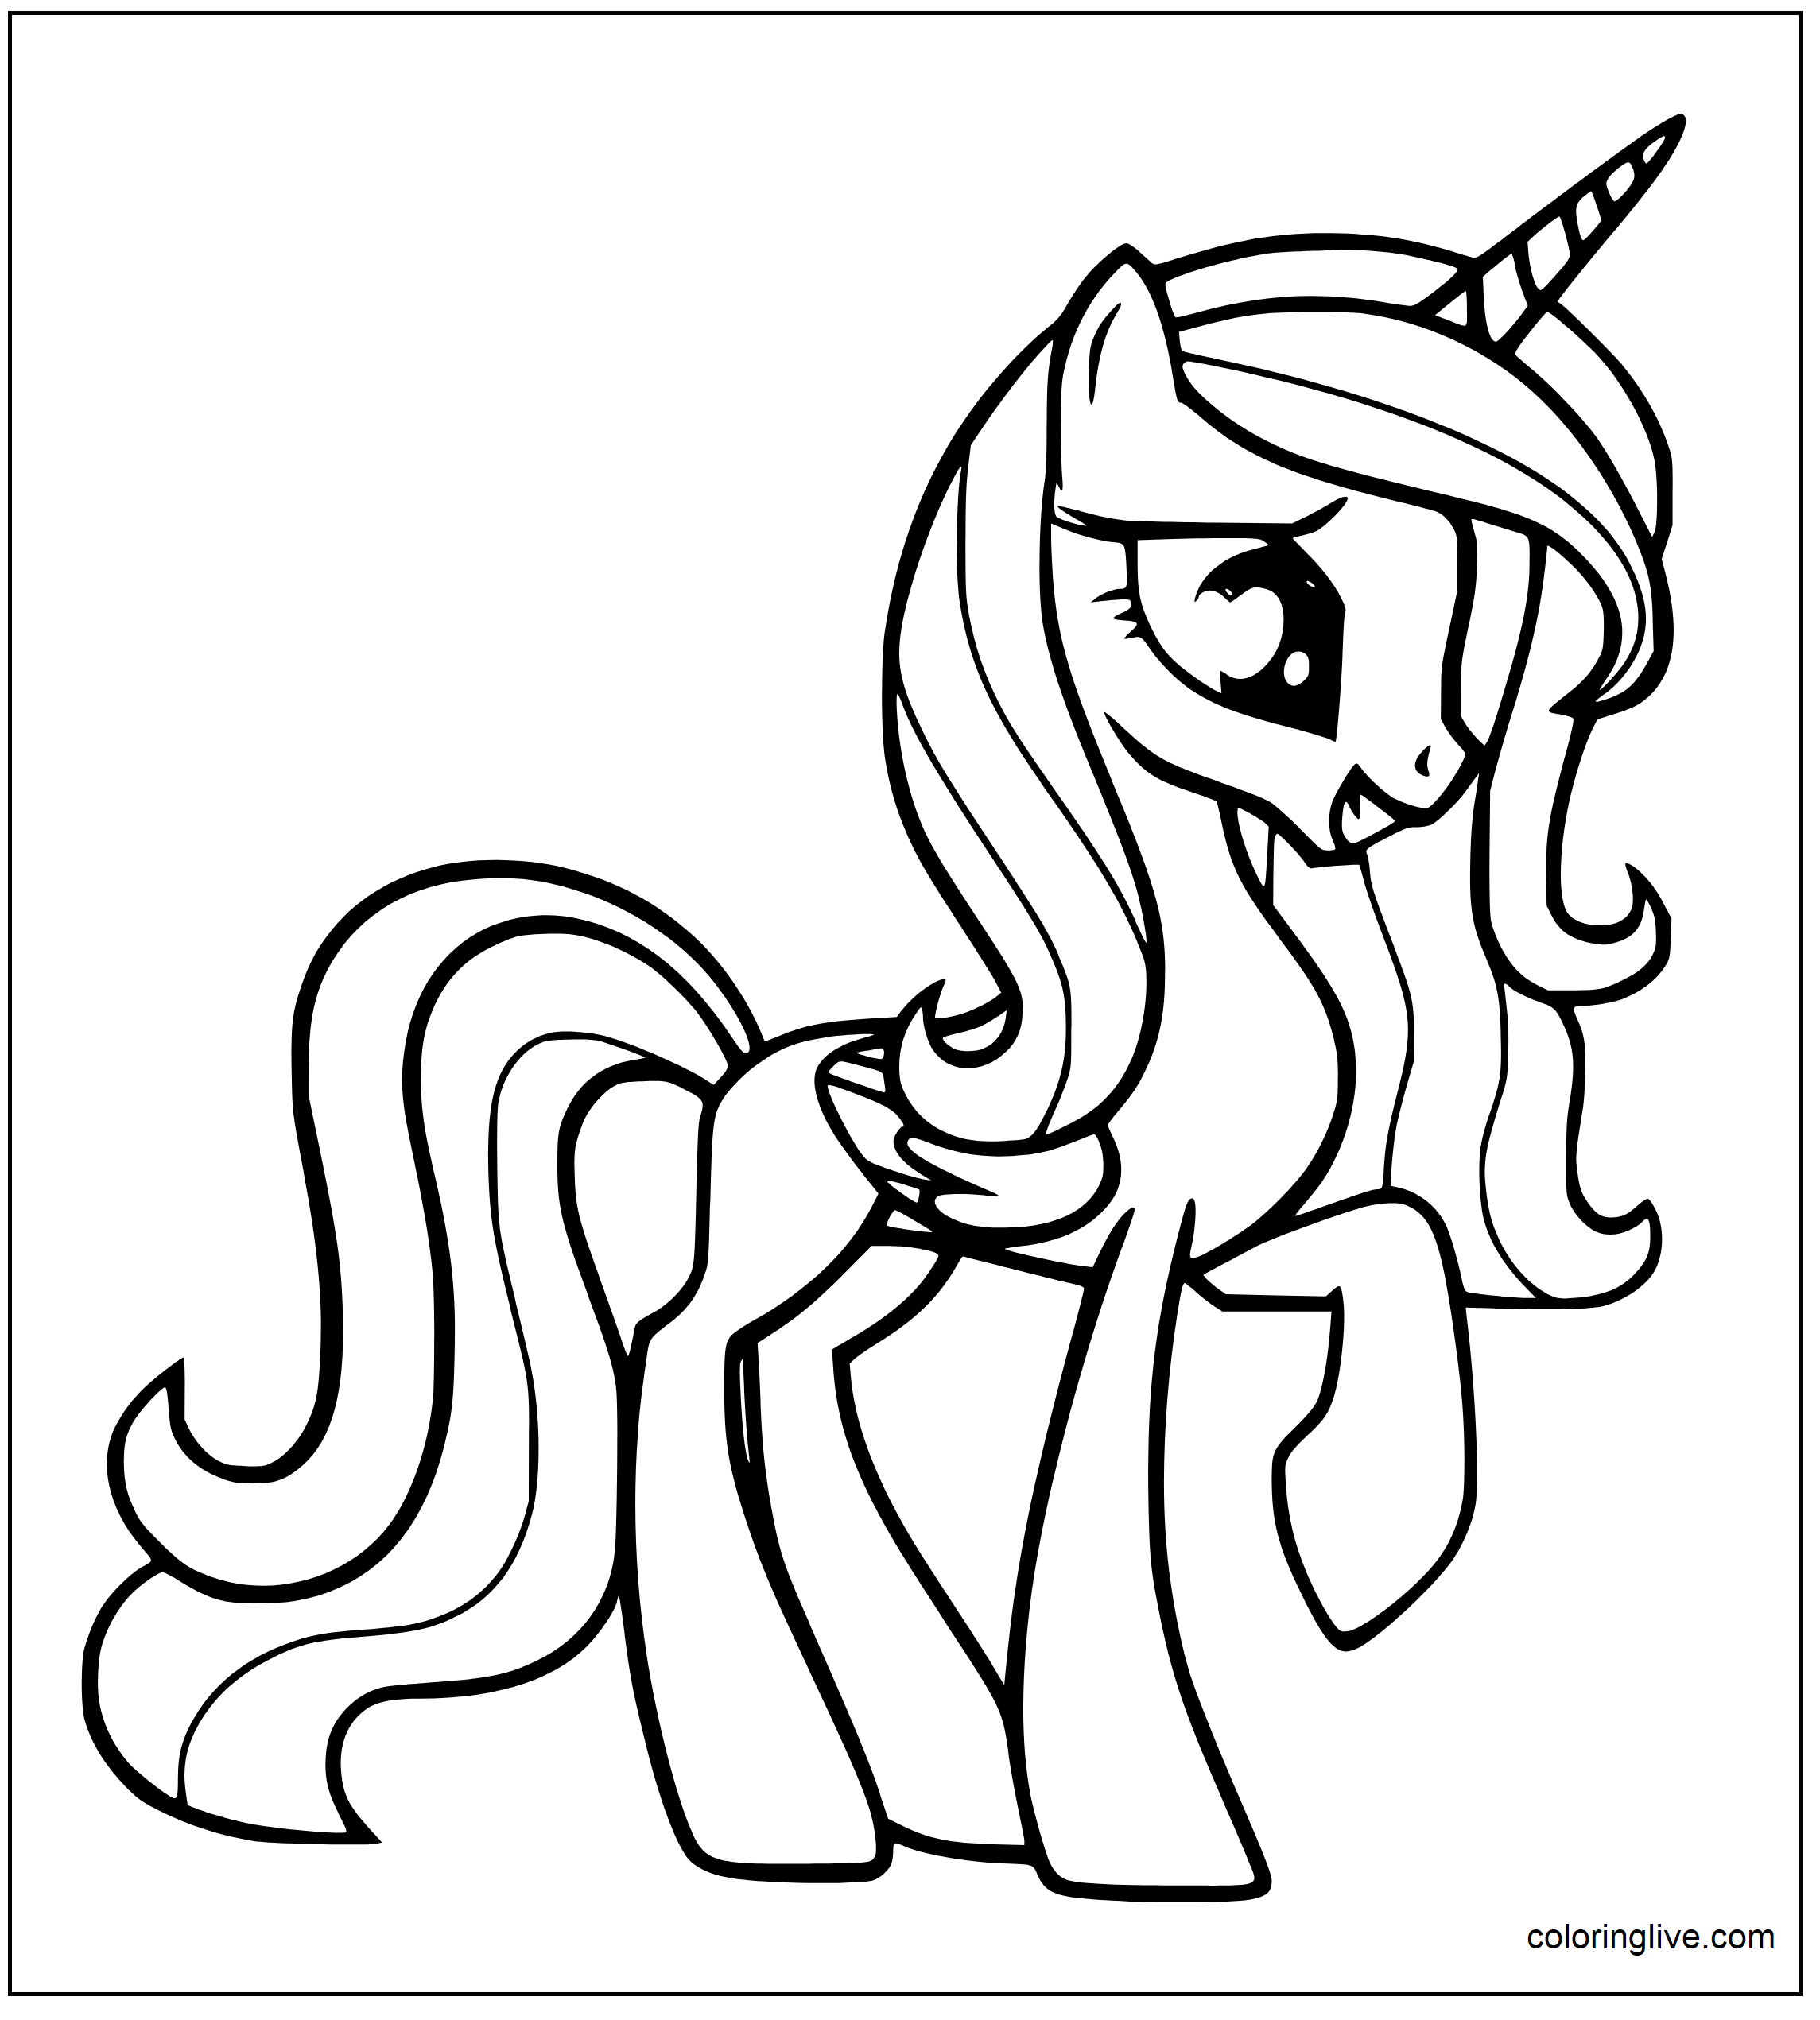 Printable Pegasus from MLP Coloring Page for kids.